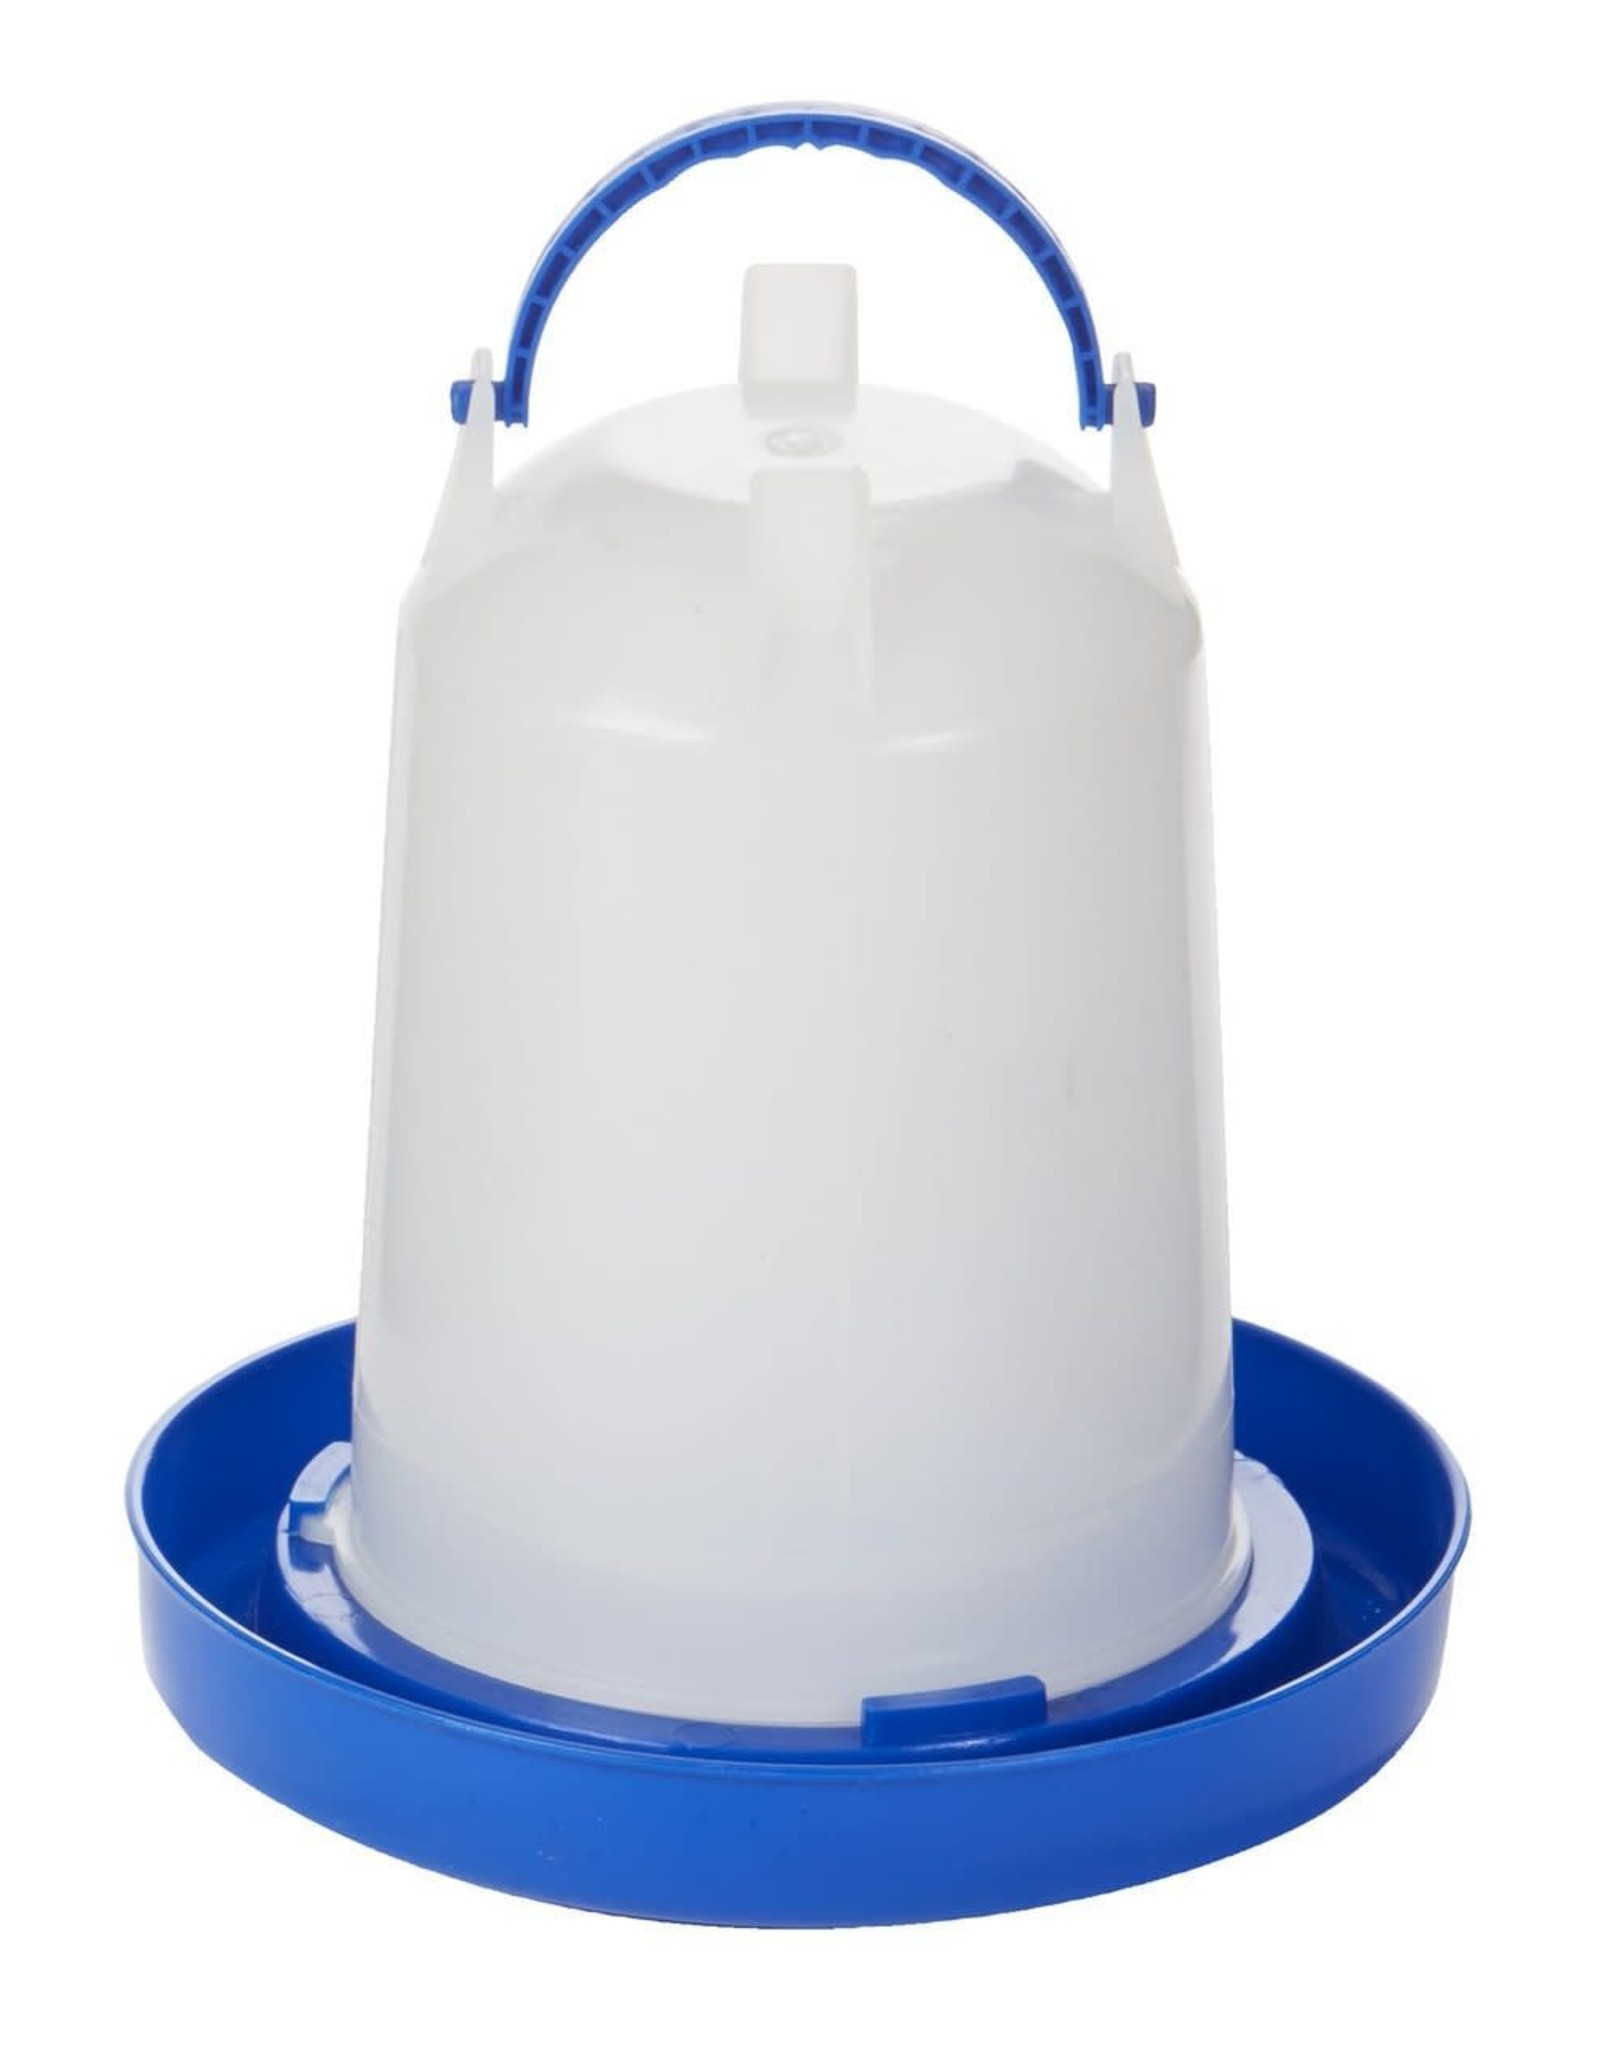 Plastic Poultry Fount 2.5 gal - Double - Tuf - Blue - 115-033